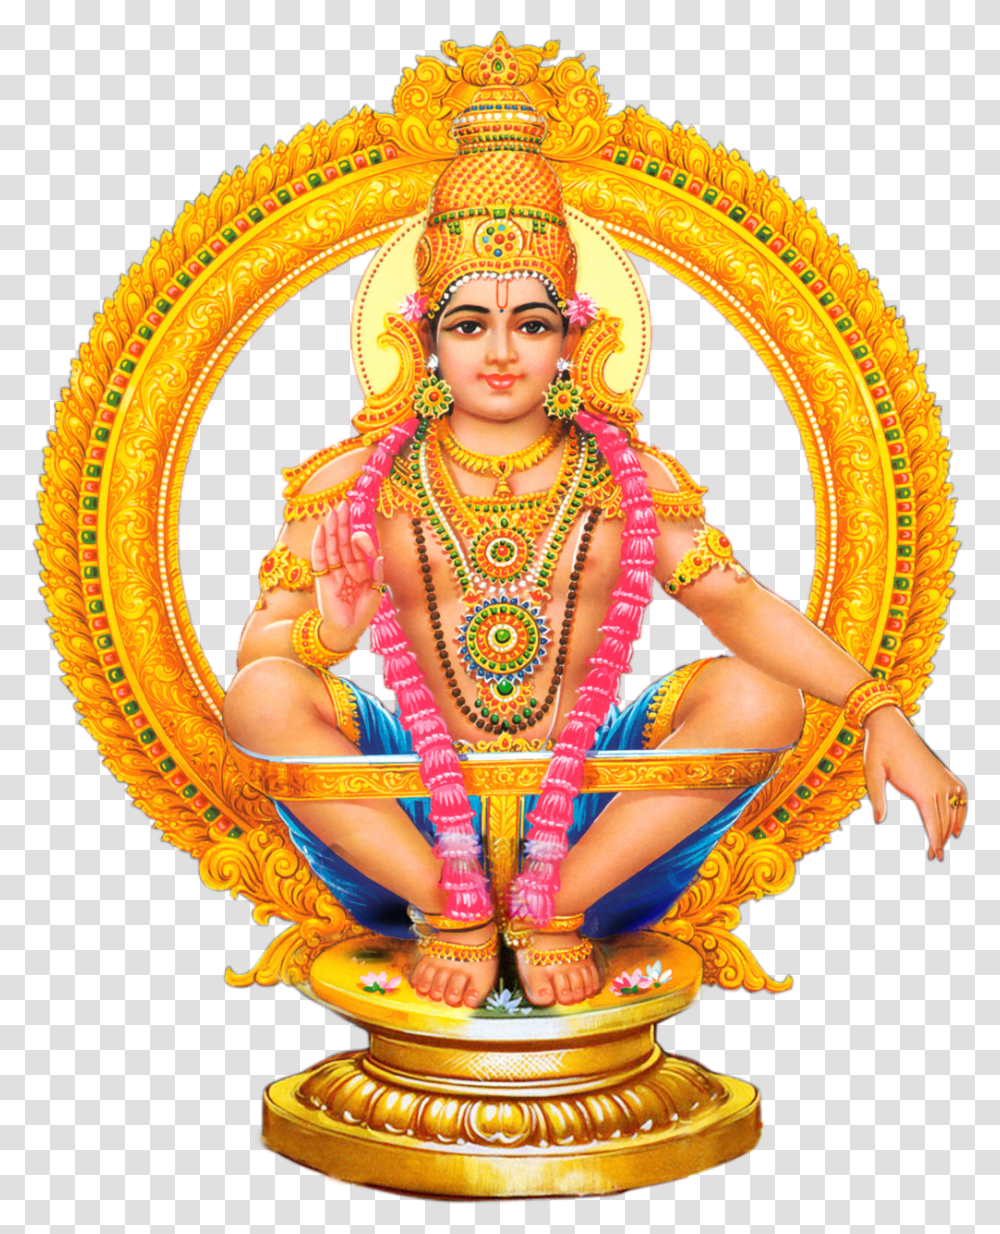 Best Lord Ayyappa Images In 2014 Ayyappa Swamy Images, Person, Human, Crowd, Festival Transparent Png